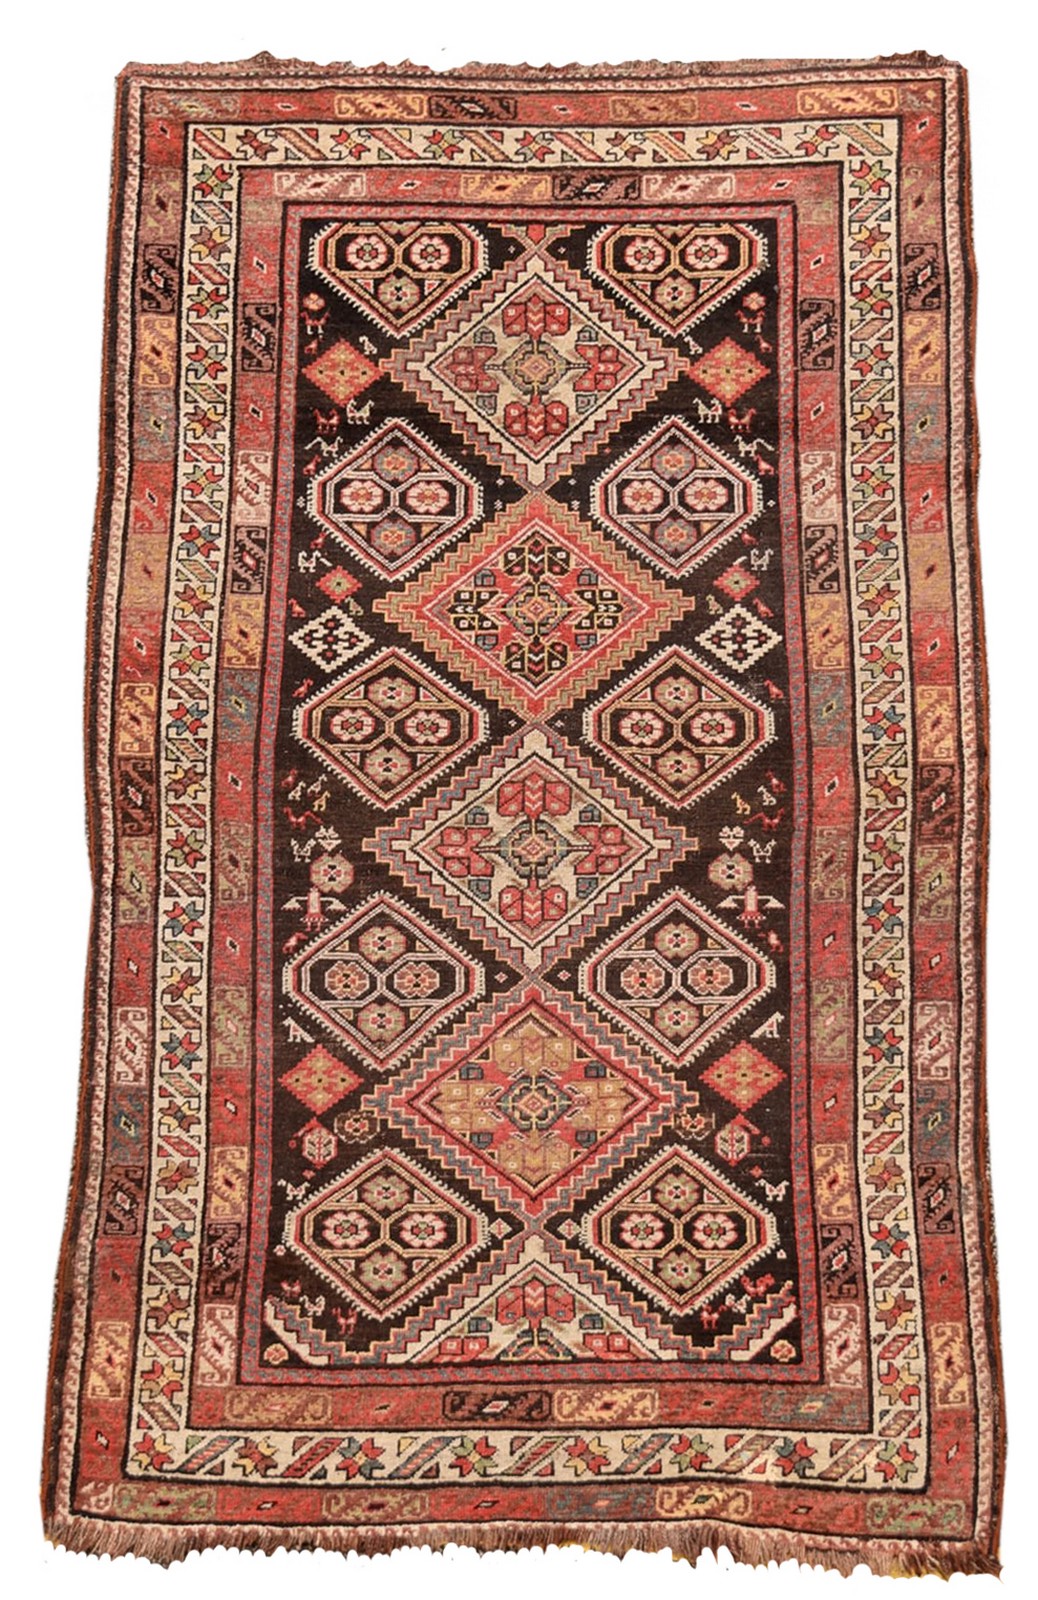 A Hamadan runner, 240 x 130cm (94 x 51in)  Slightly faded, but even pile levels overall